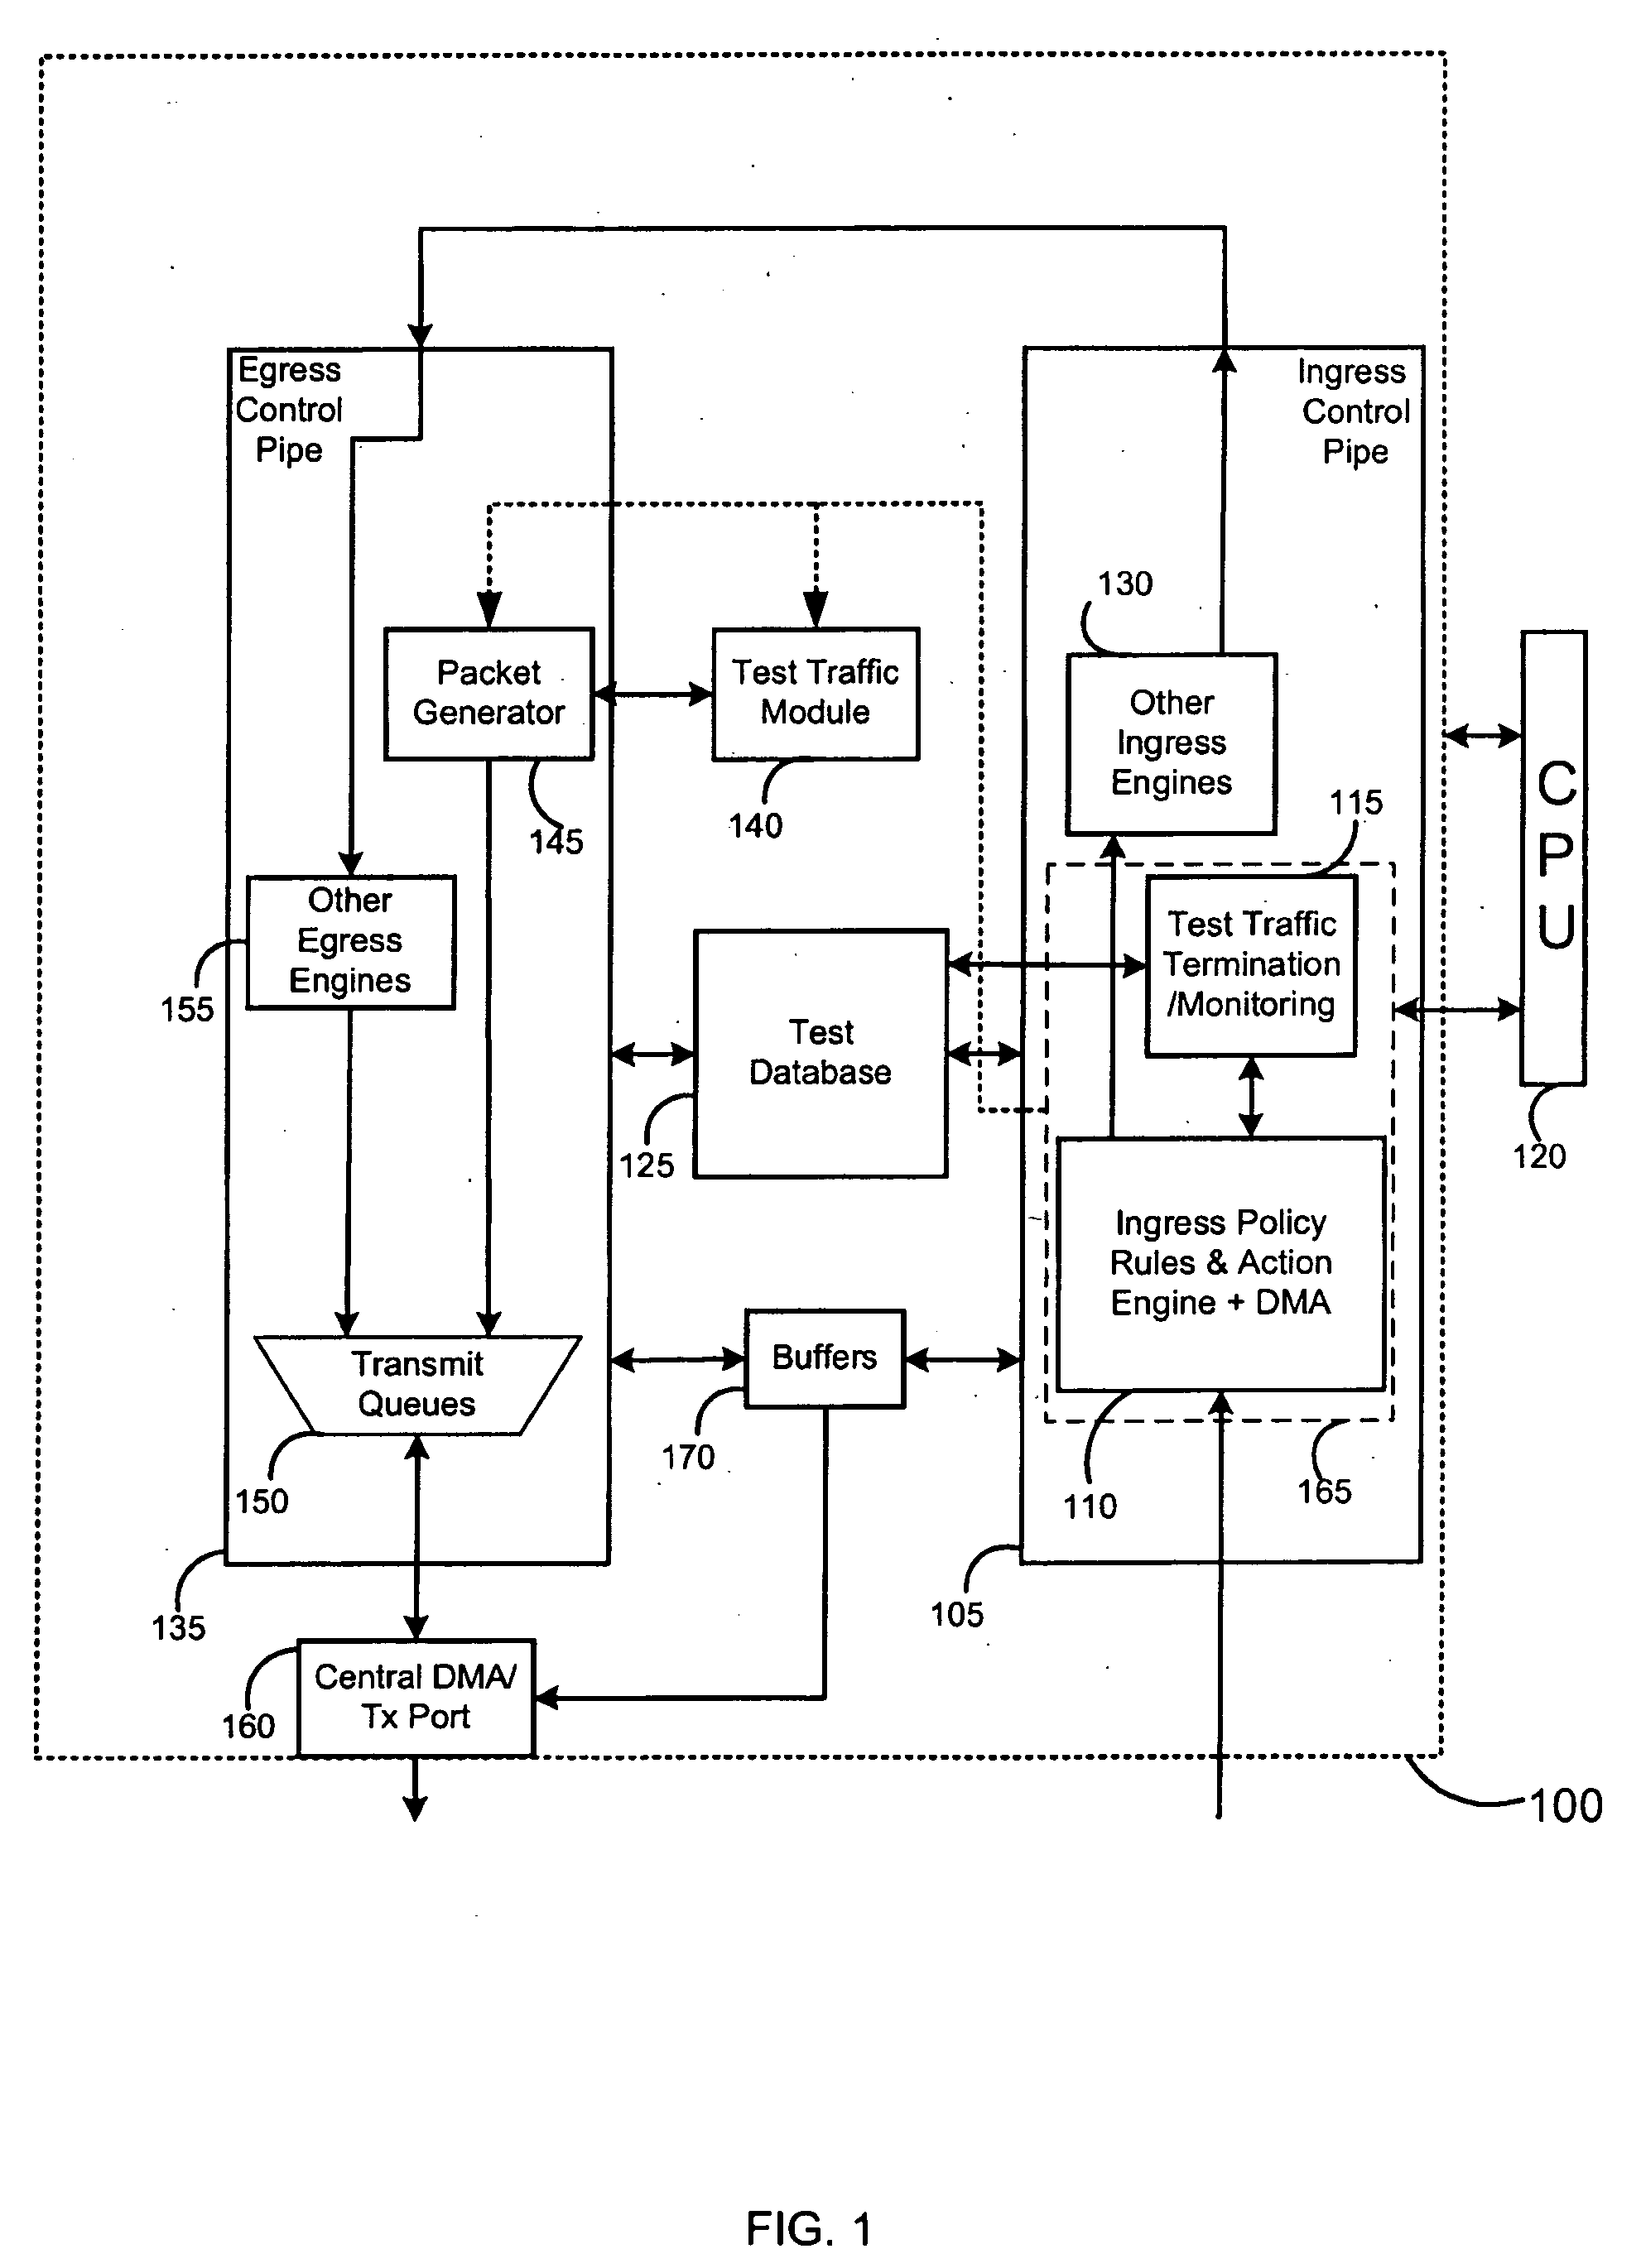 Hardware implementation of network testing and performance monitoring in a network device